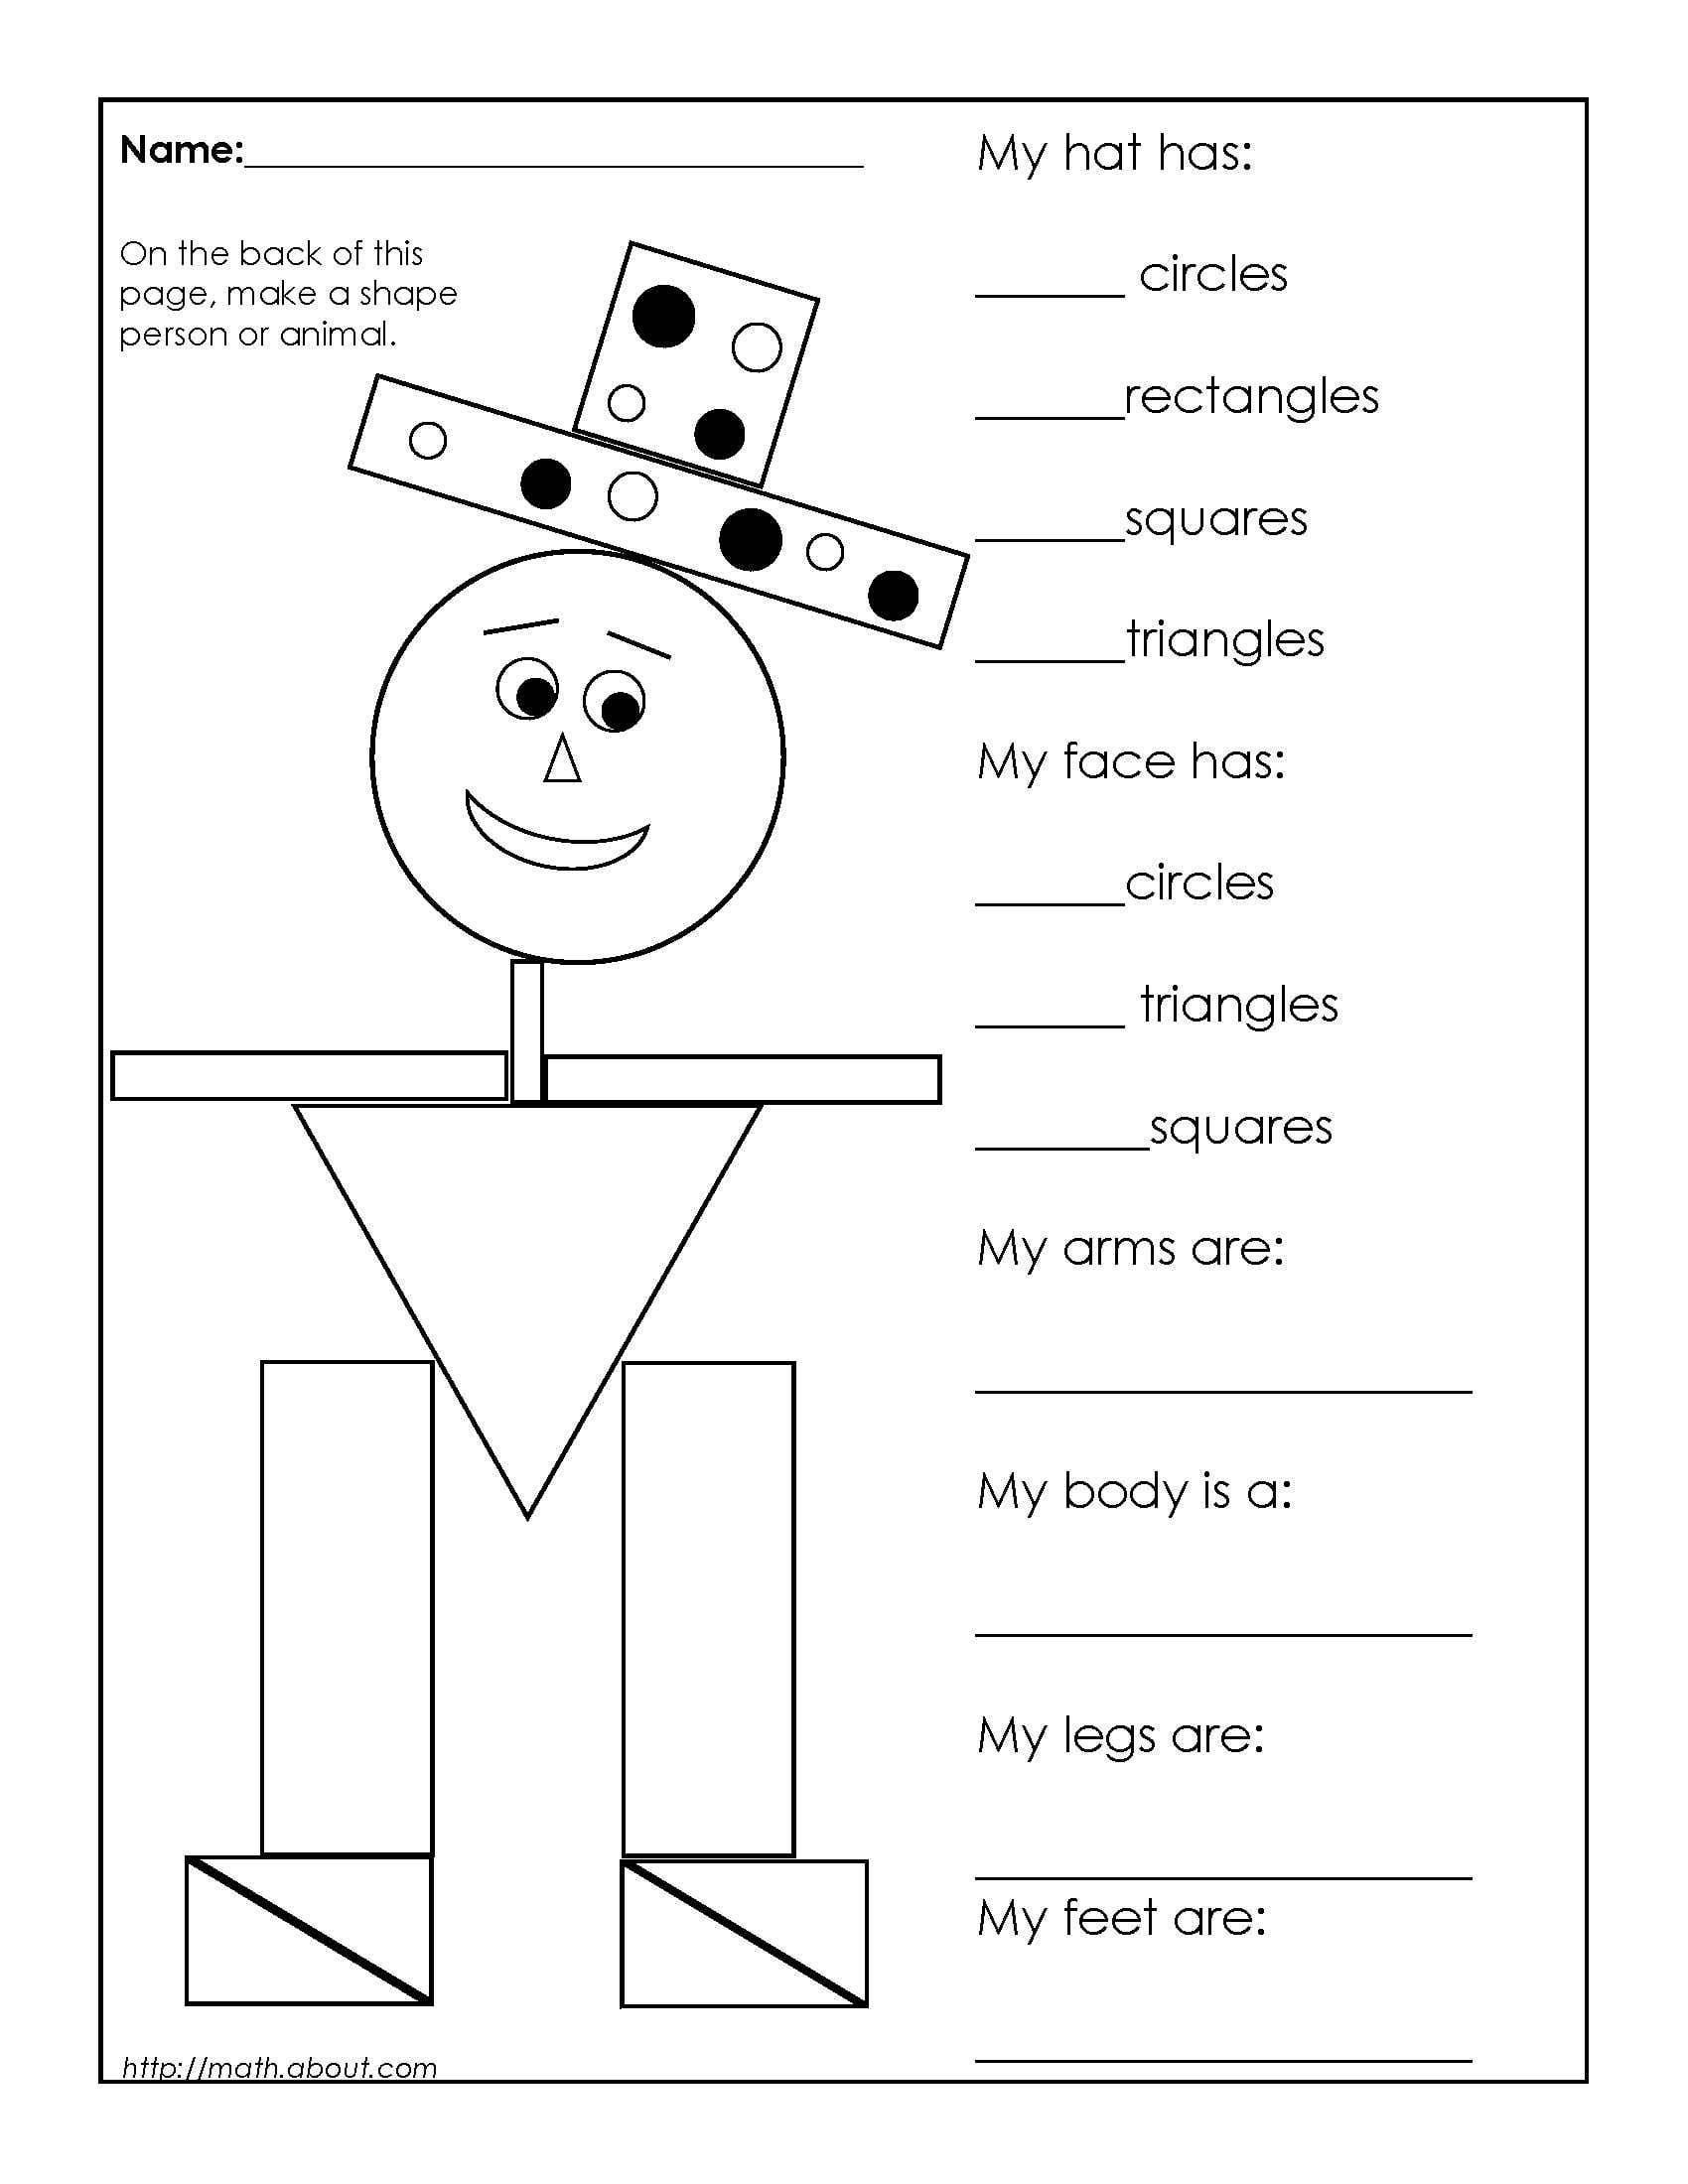 Free Math Worksheets Third Grade 3 Counting Money Money Canadian In Words